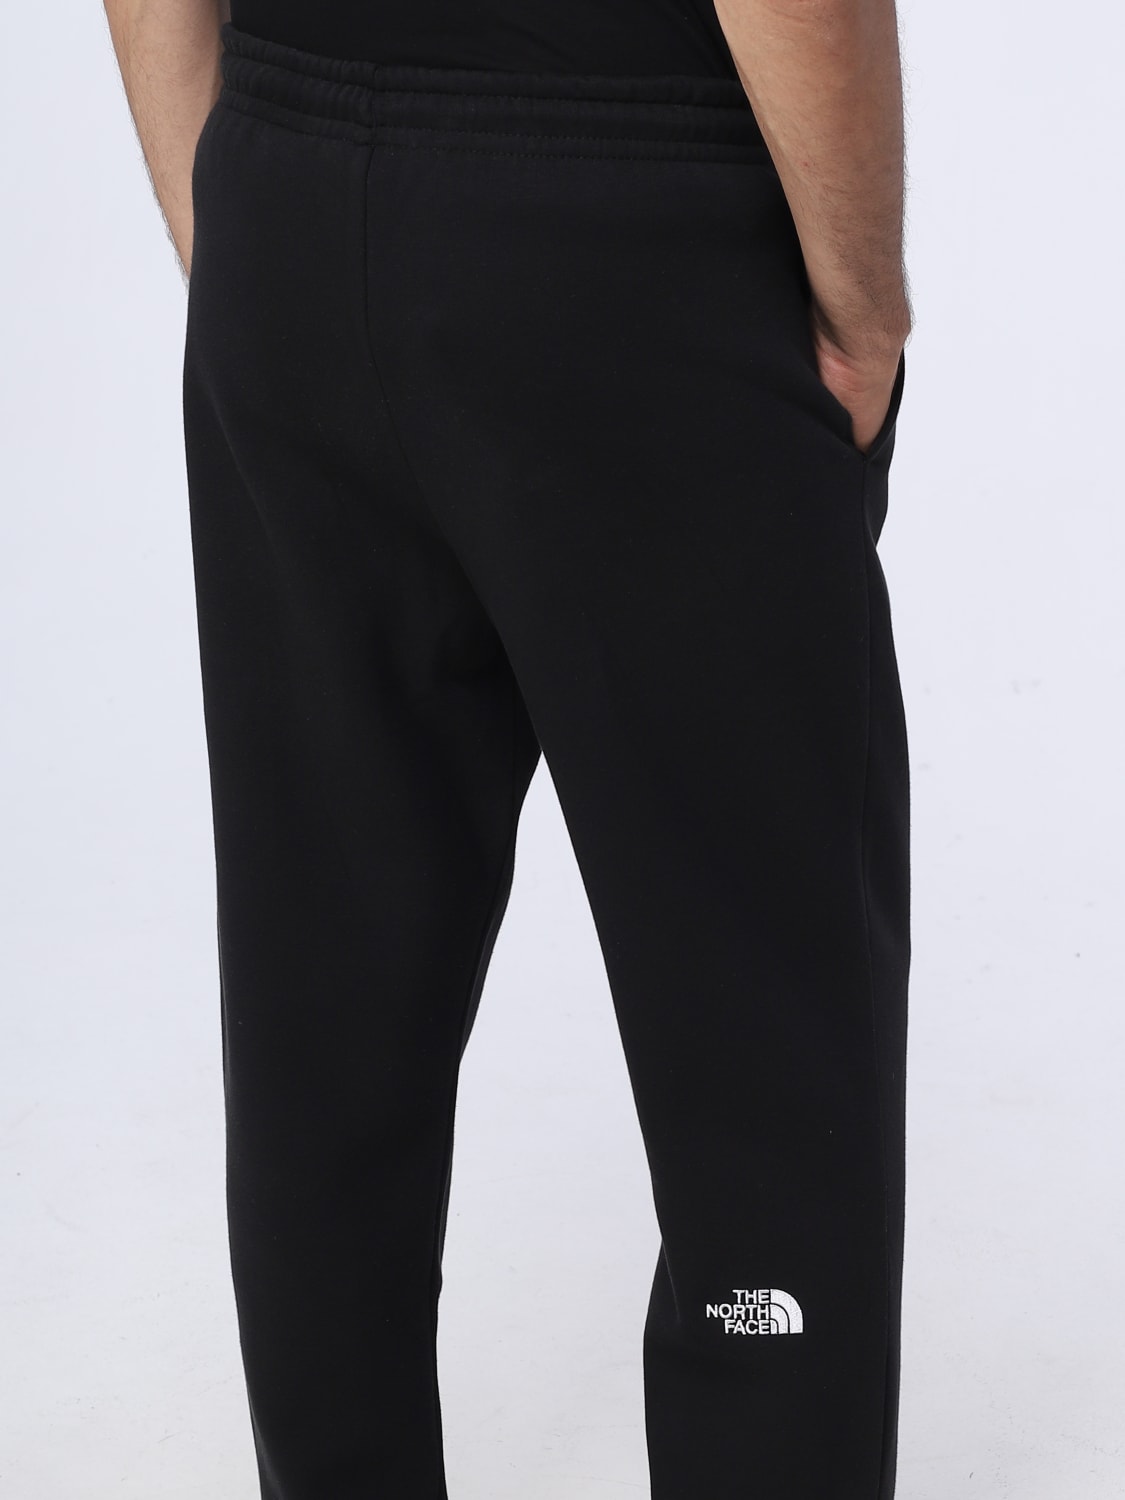 THE NORTH FACE: pants for man - Black | The North Face pants NF0A7ZJB ...